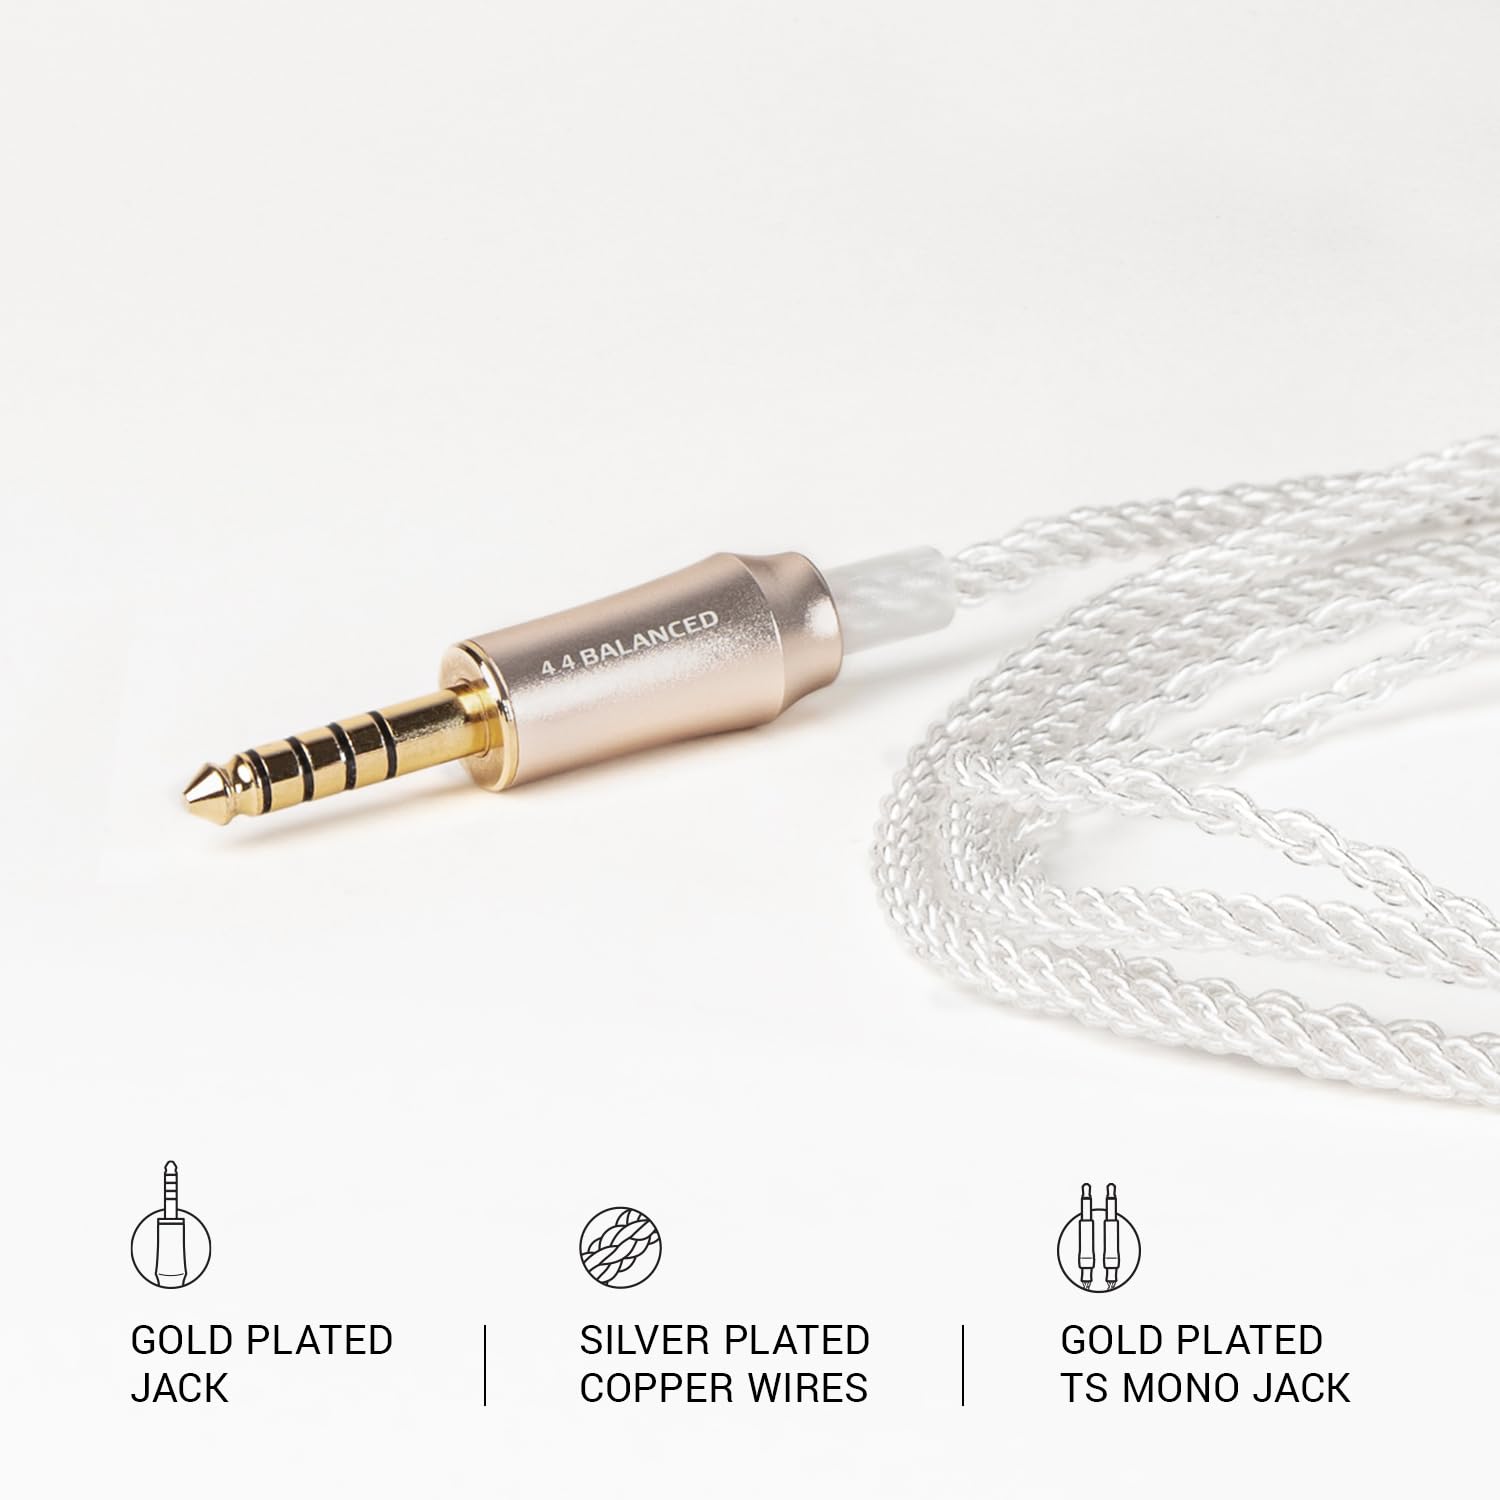 MEZE AUDIO | 99 Series Silver Plated Upgrade Balanced Cable 4.4mm Jack | Headphones HiFi Cable Replacement 4.4mm Male to Dual TS Mono 3.5mm Male Connector Plug | Cable Length 1.2m/3.9ft